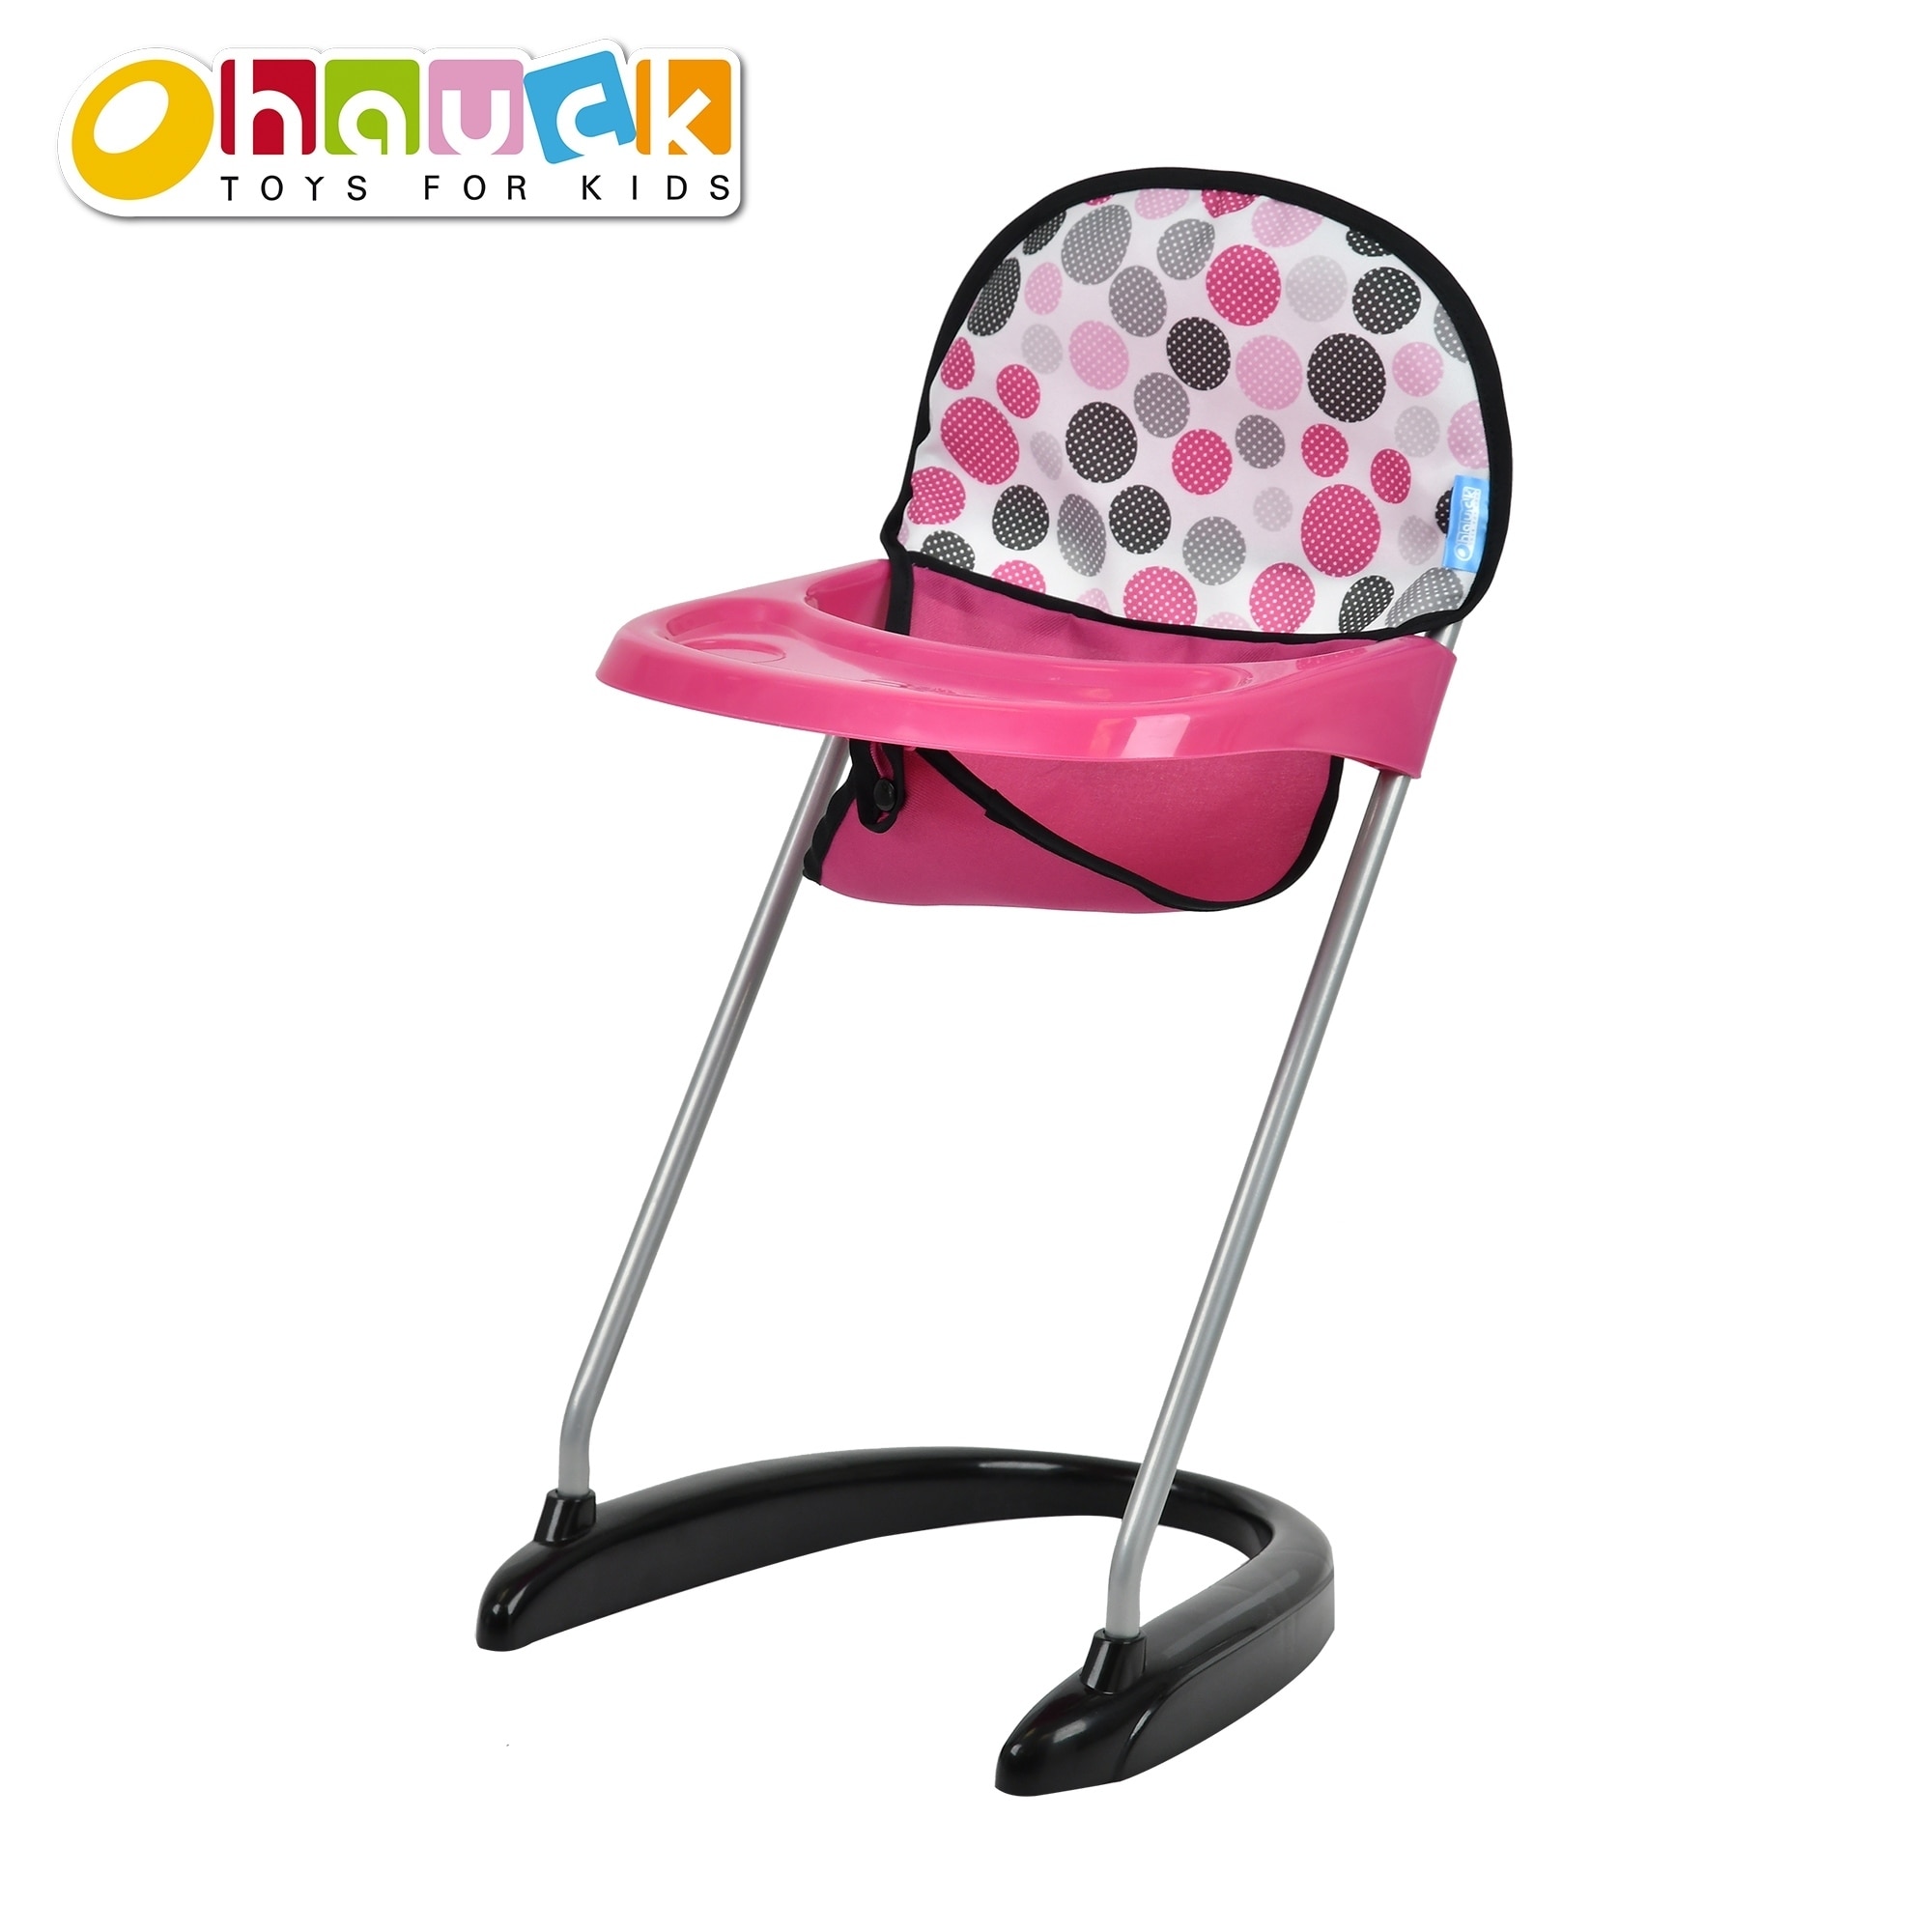 doll stroller and carseat set